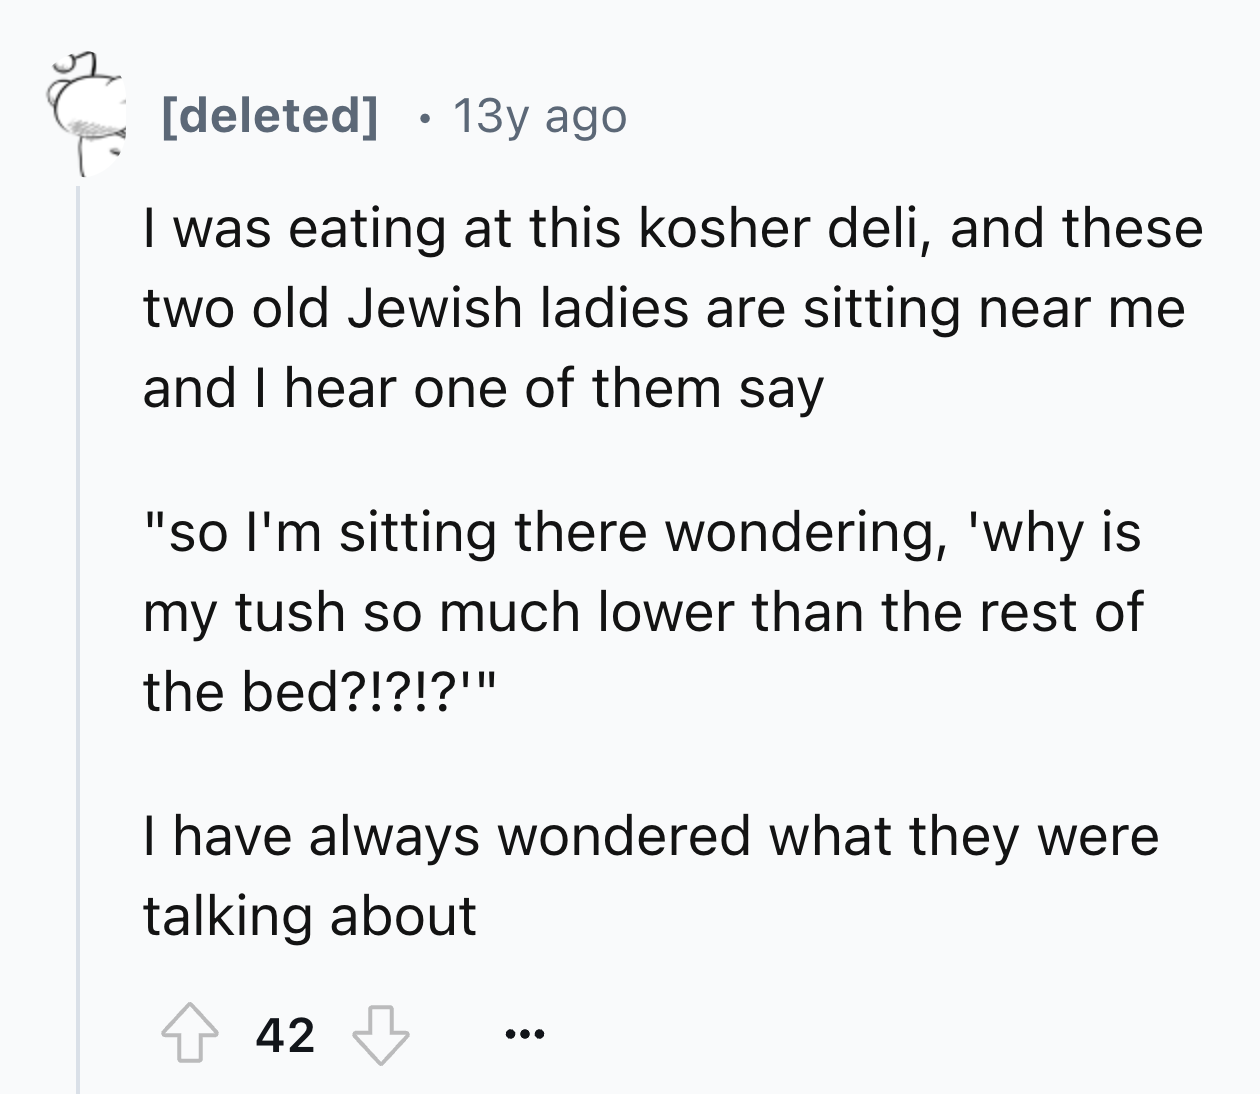 number - deleted 13y ago I was eating at this kosher deli, and these two old Jewish ladies are sitting near me and I hear one of them say "so I'm sitting there wondering, 'why is my tush so much lower than the rest of the bed?!?!?'" I have always wondered